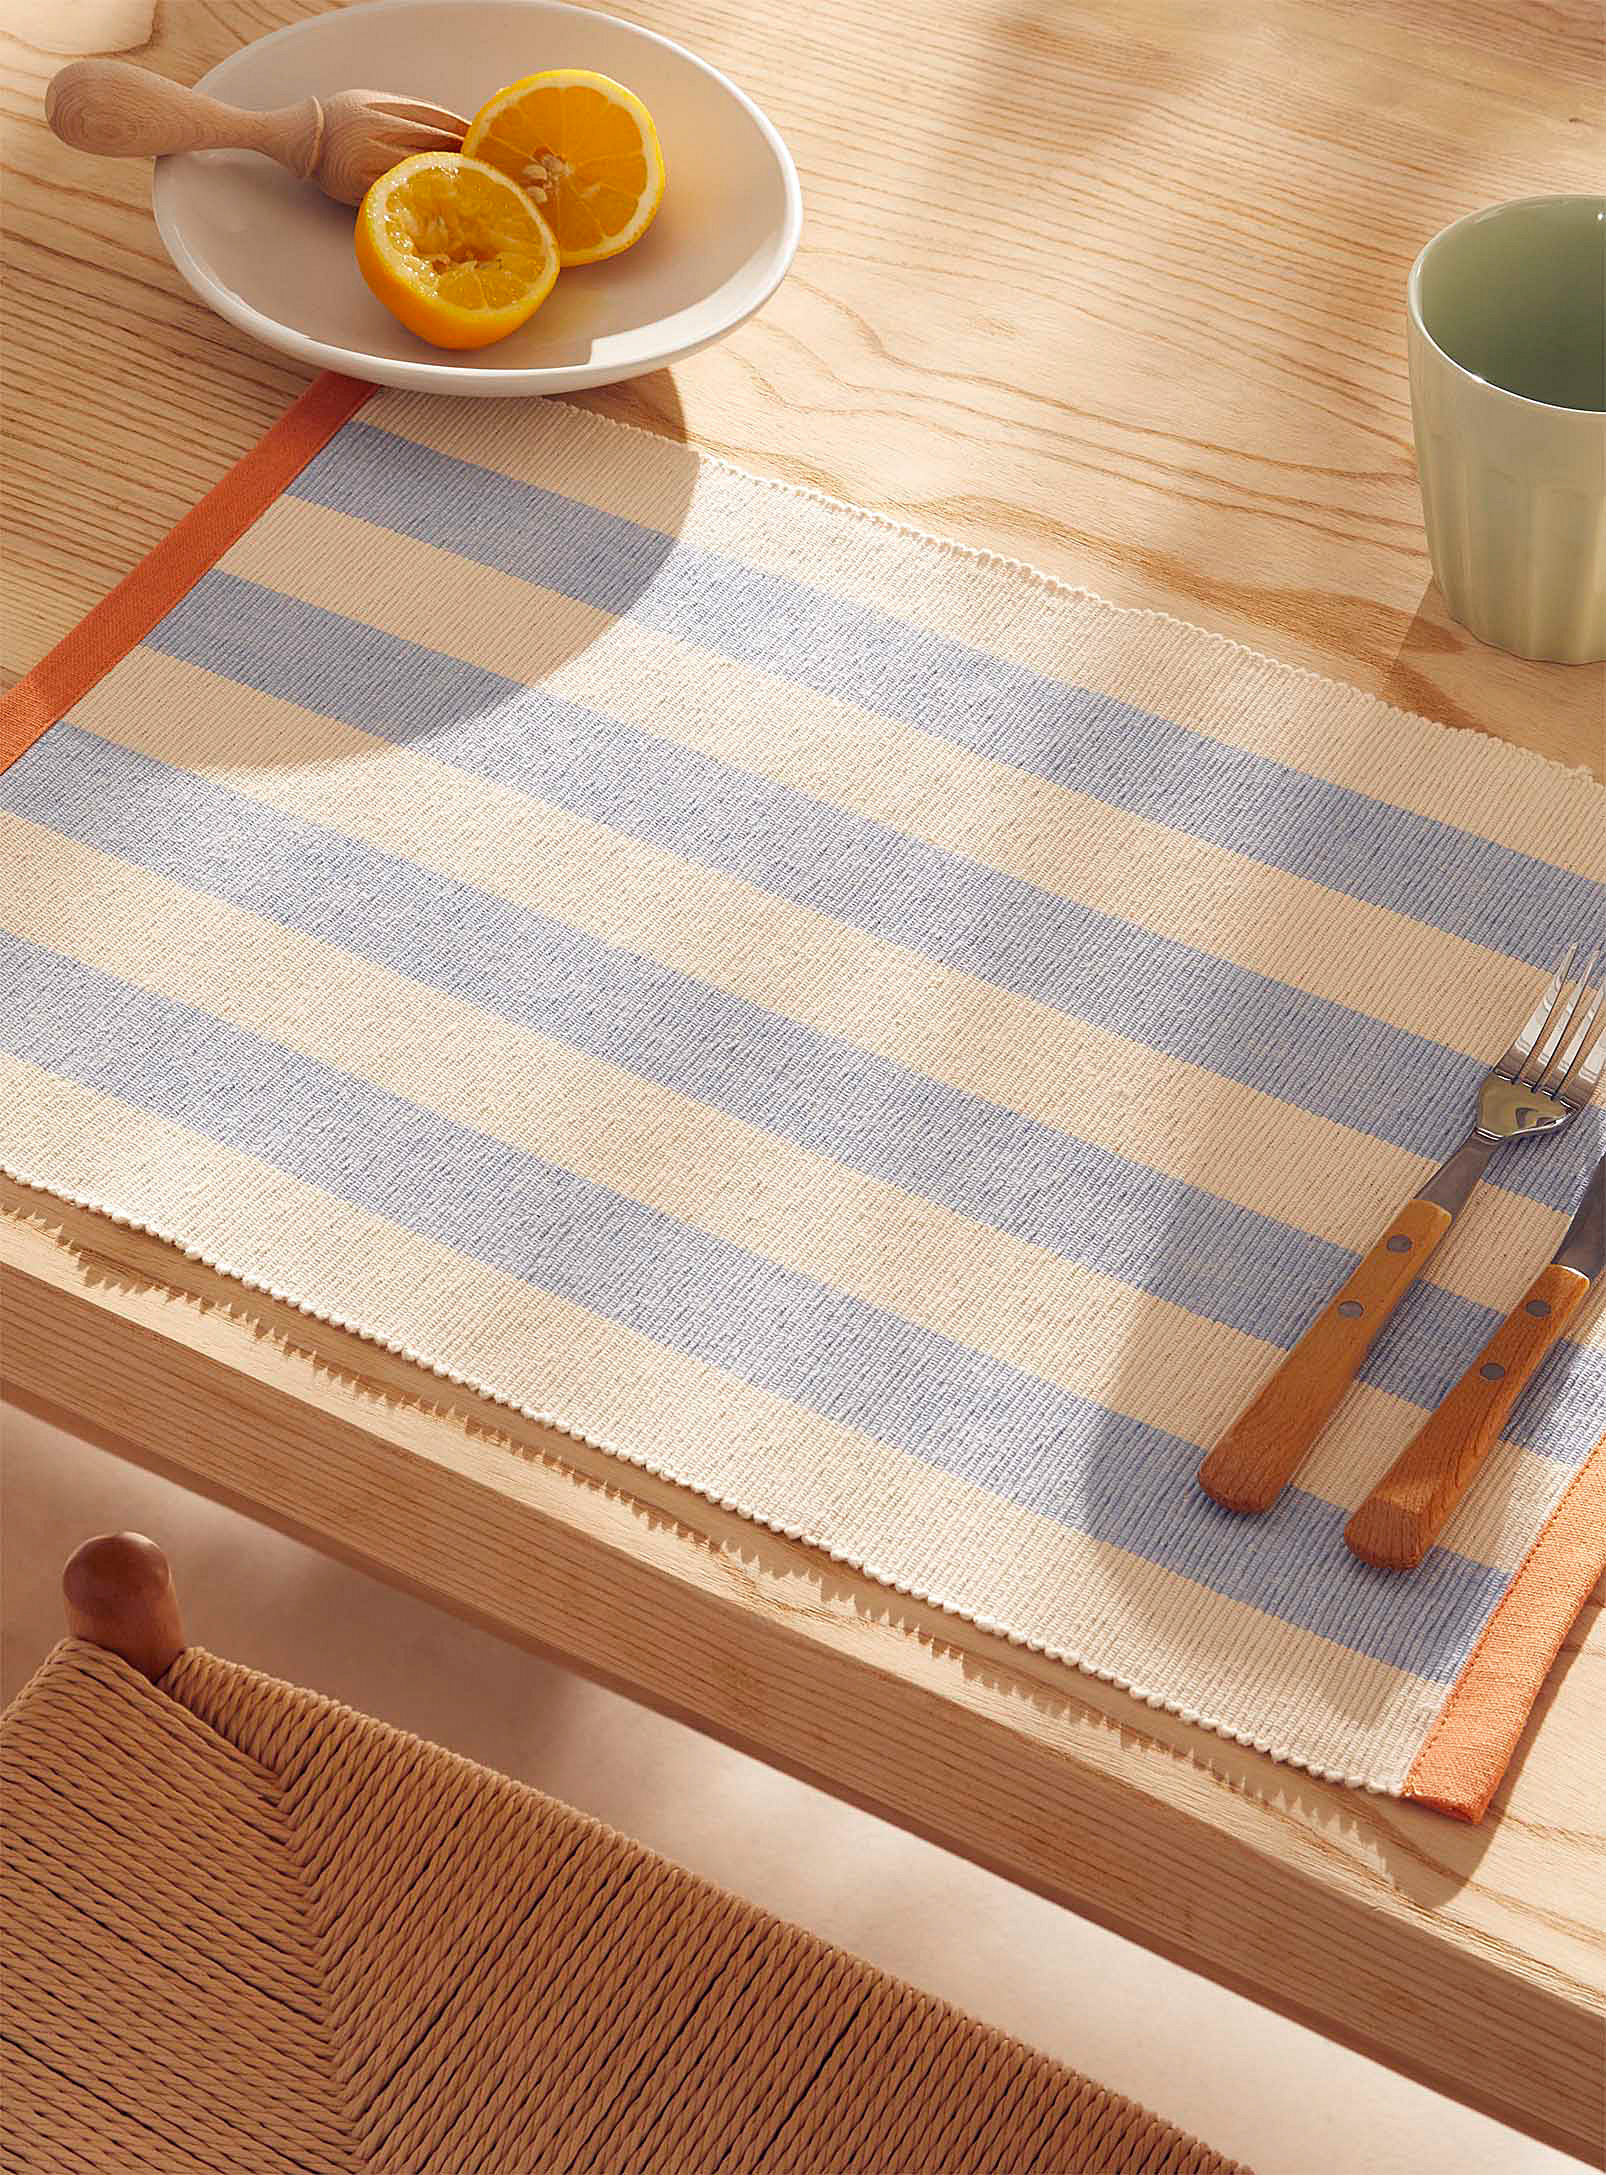 Simons Maison - Vacation stripes recycled cotton placemat